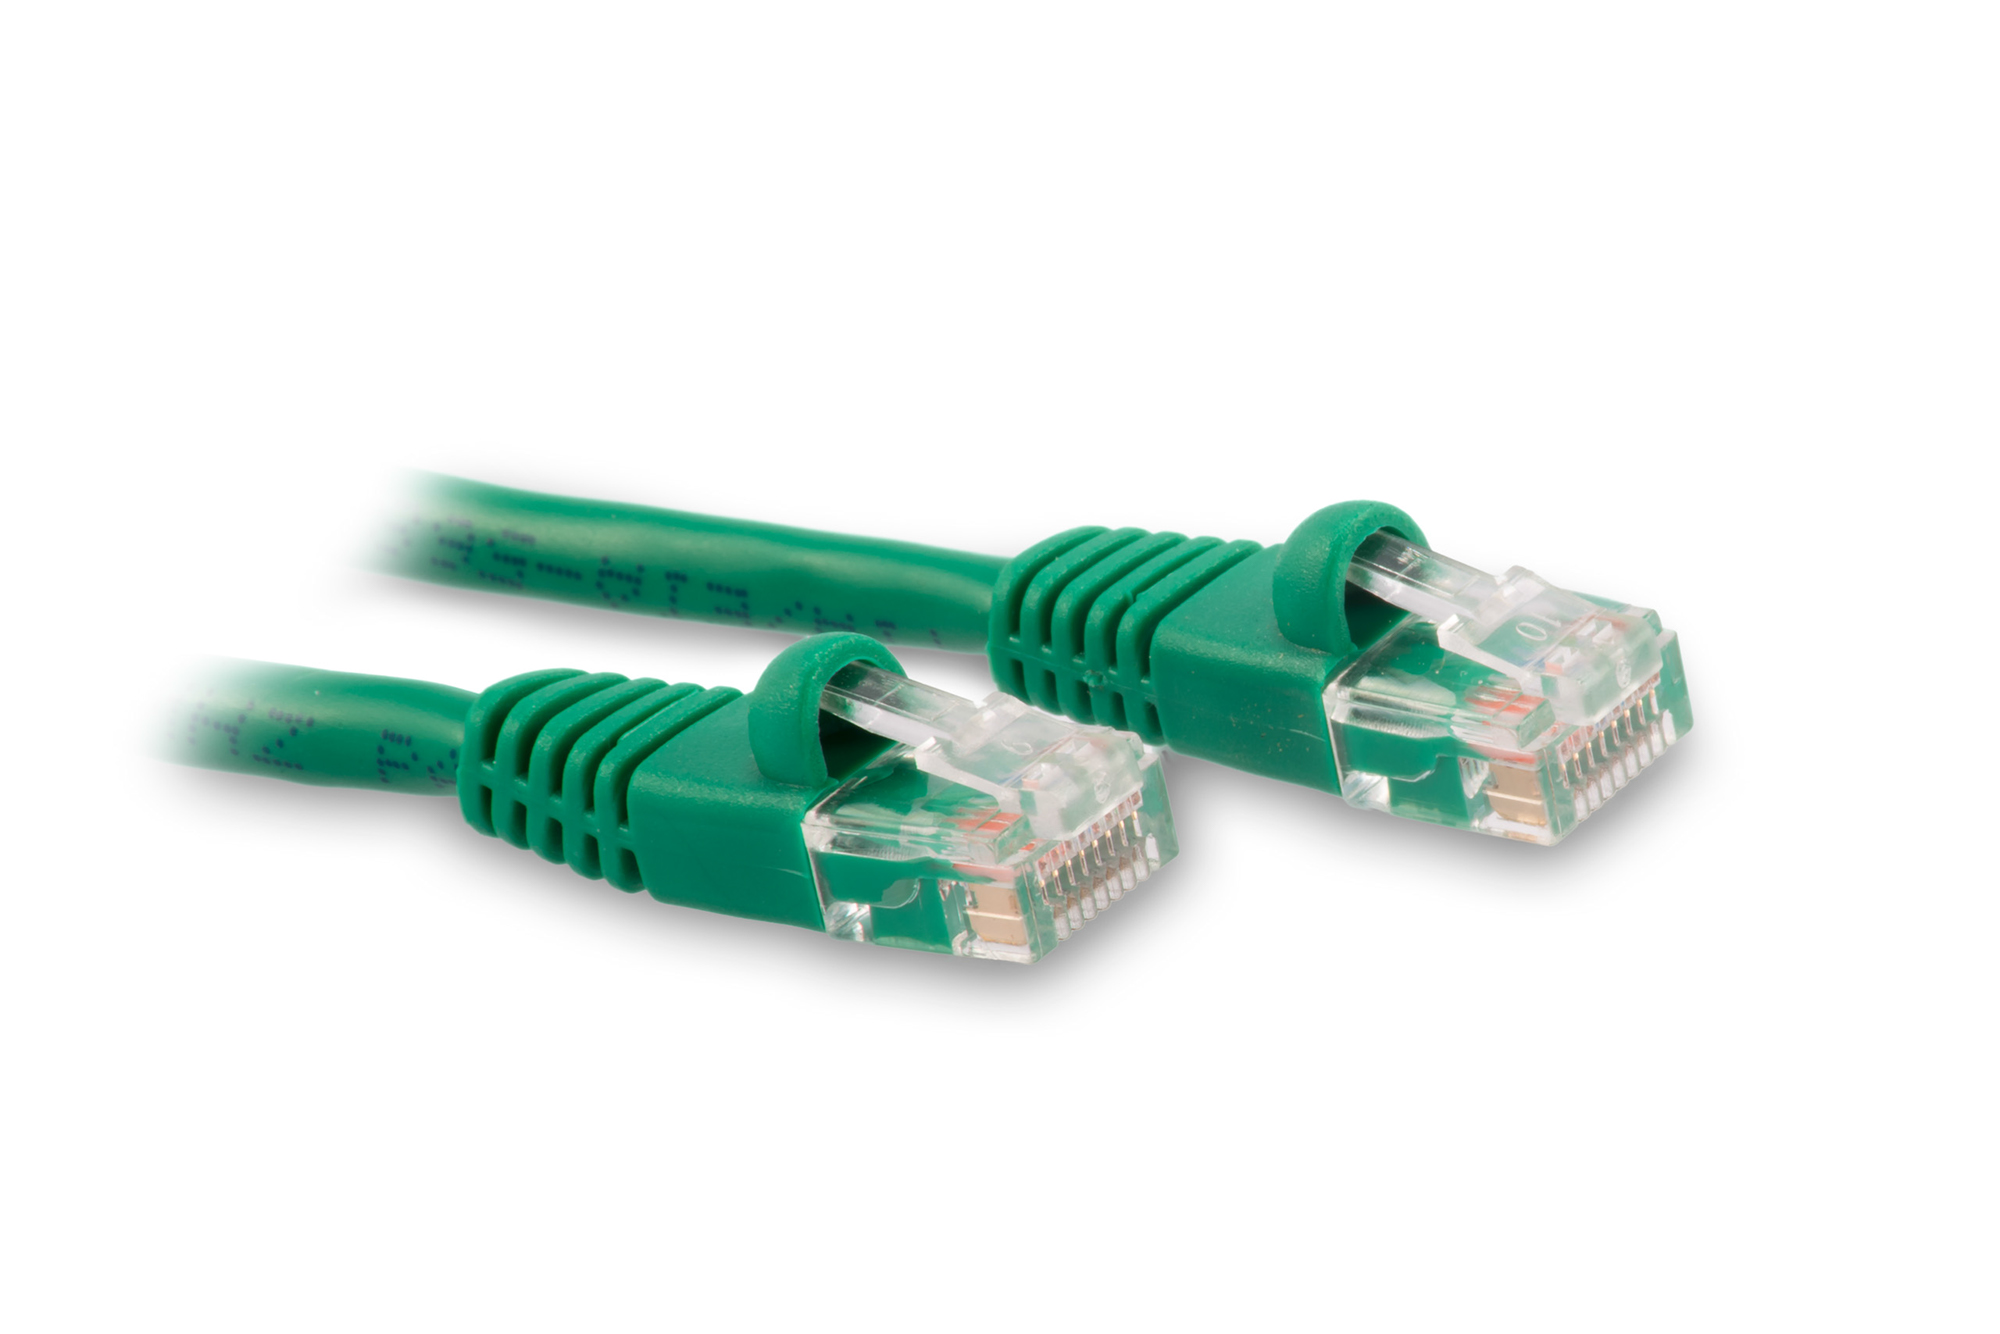 25ft Cat6 Ethernet Patch Cable - Green Color - Snagless Boot, Stranded, RJ45, 550Mhz, 24AWG